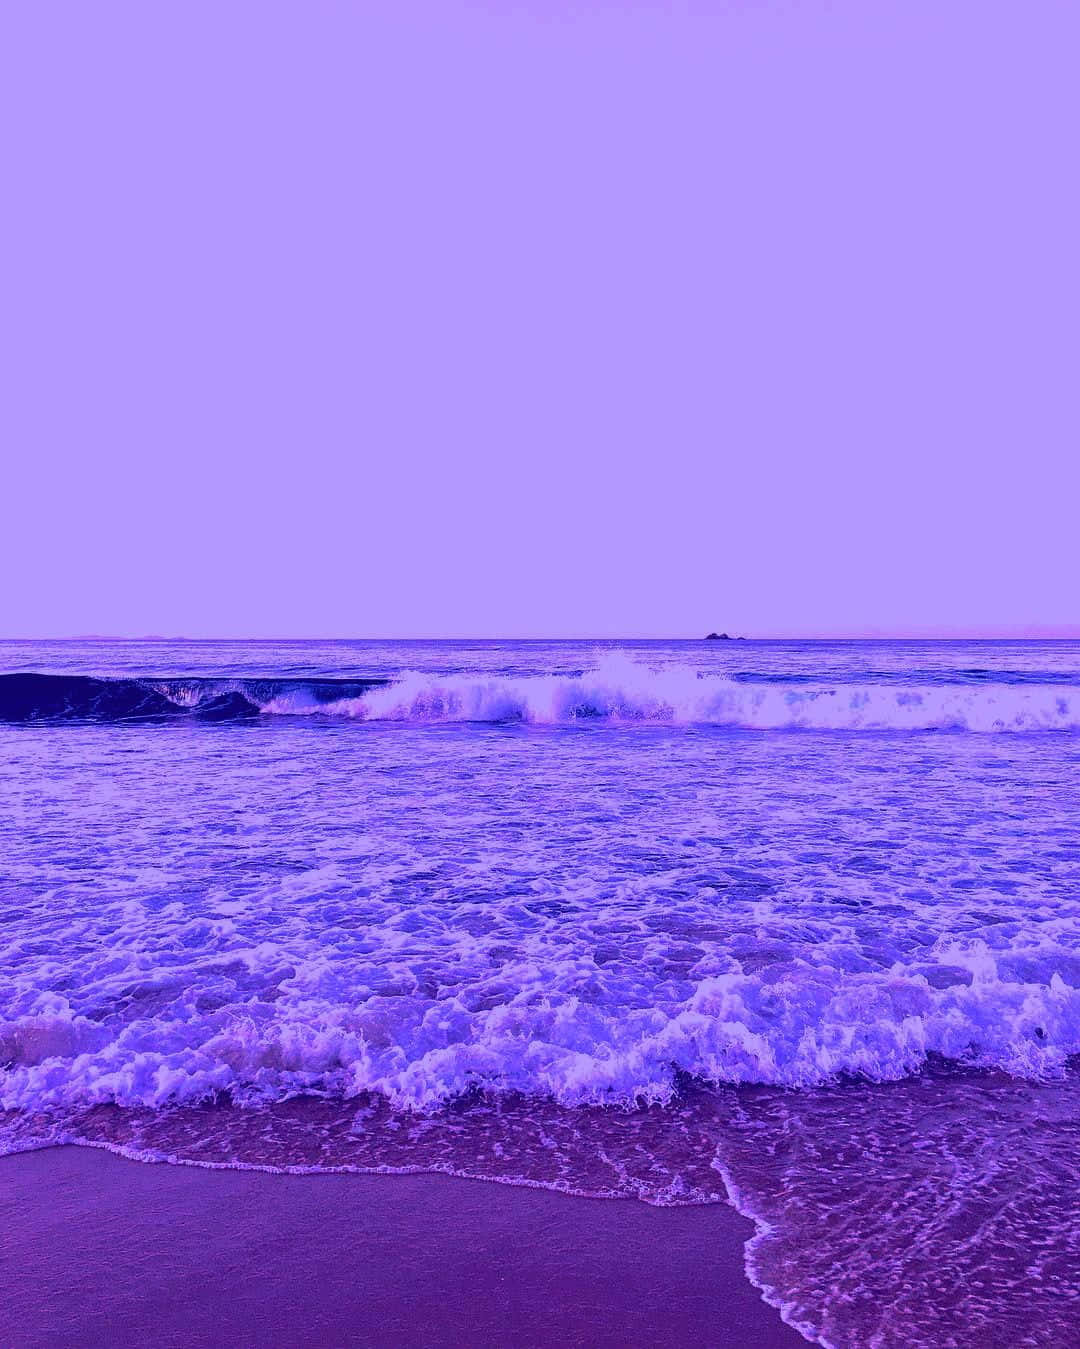 Caption: "ethereal Purple Gradient Background"